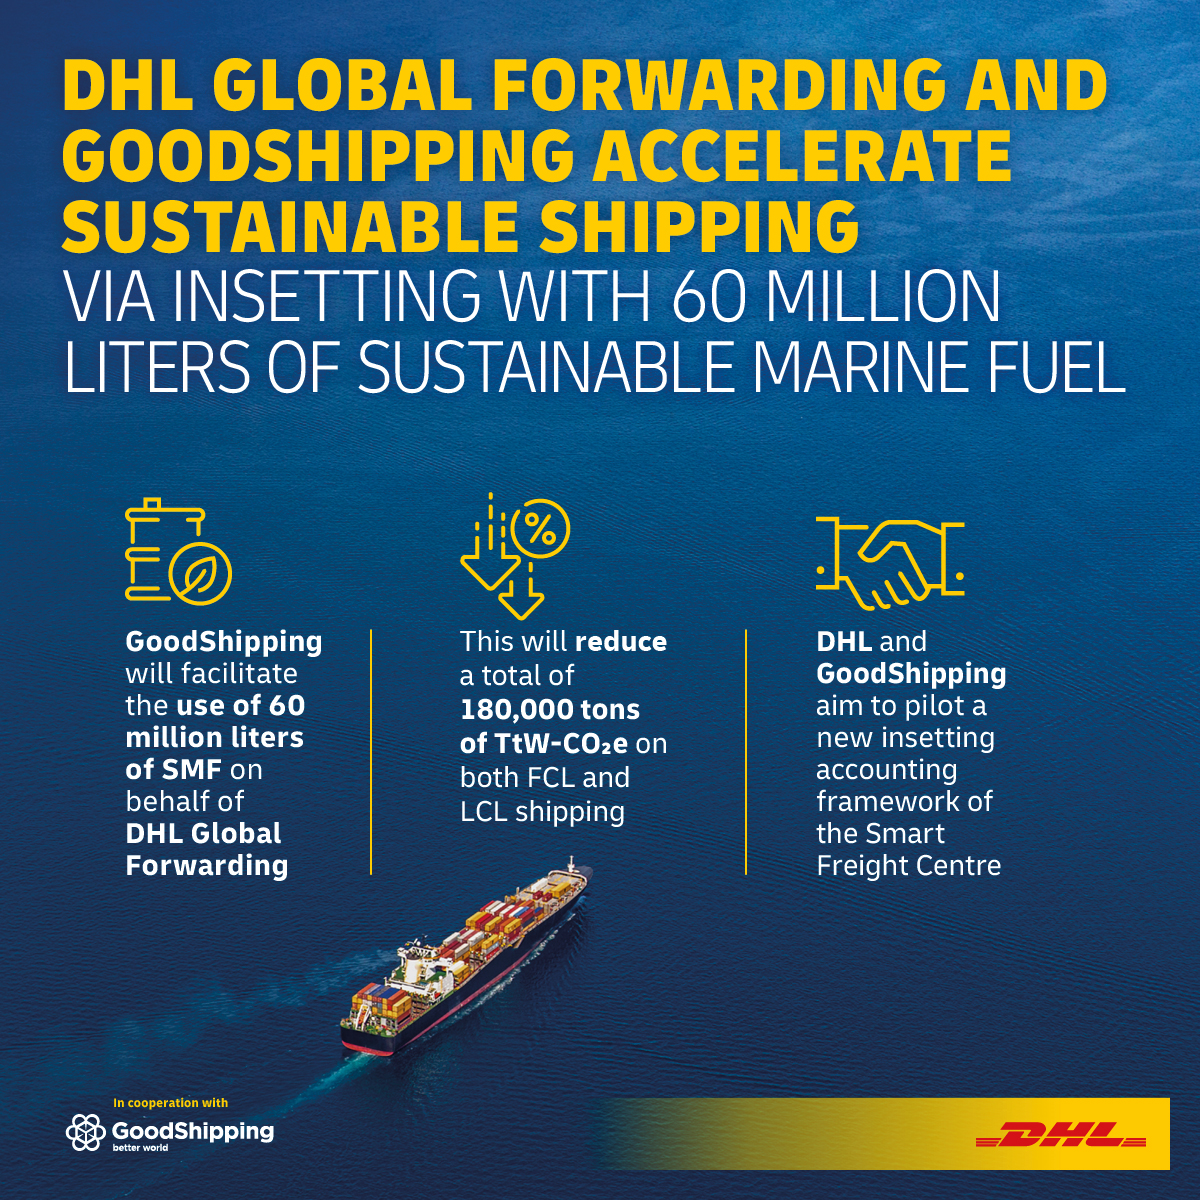 .@dhl_forwarding and @GoodShipping1 accelerate sustainable shipping with 60 million liters of Sustainable Marine Fuel. As part of our GoGreen Plus service, #SustainableMarineFuels play an important role in decarbonizing ocean freight via insetting. go.dhl/uNuG3r